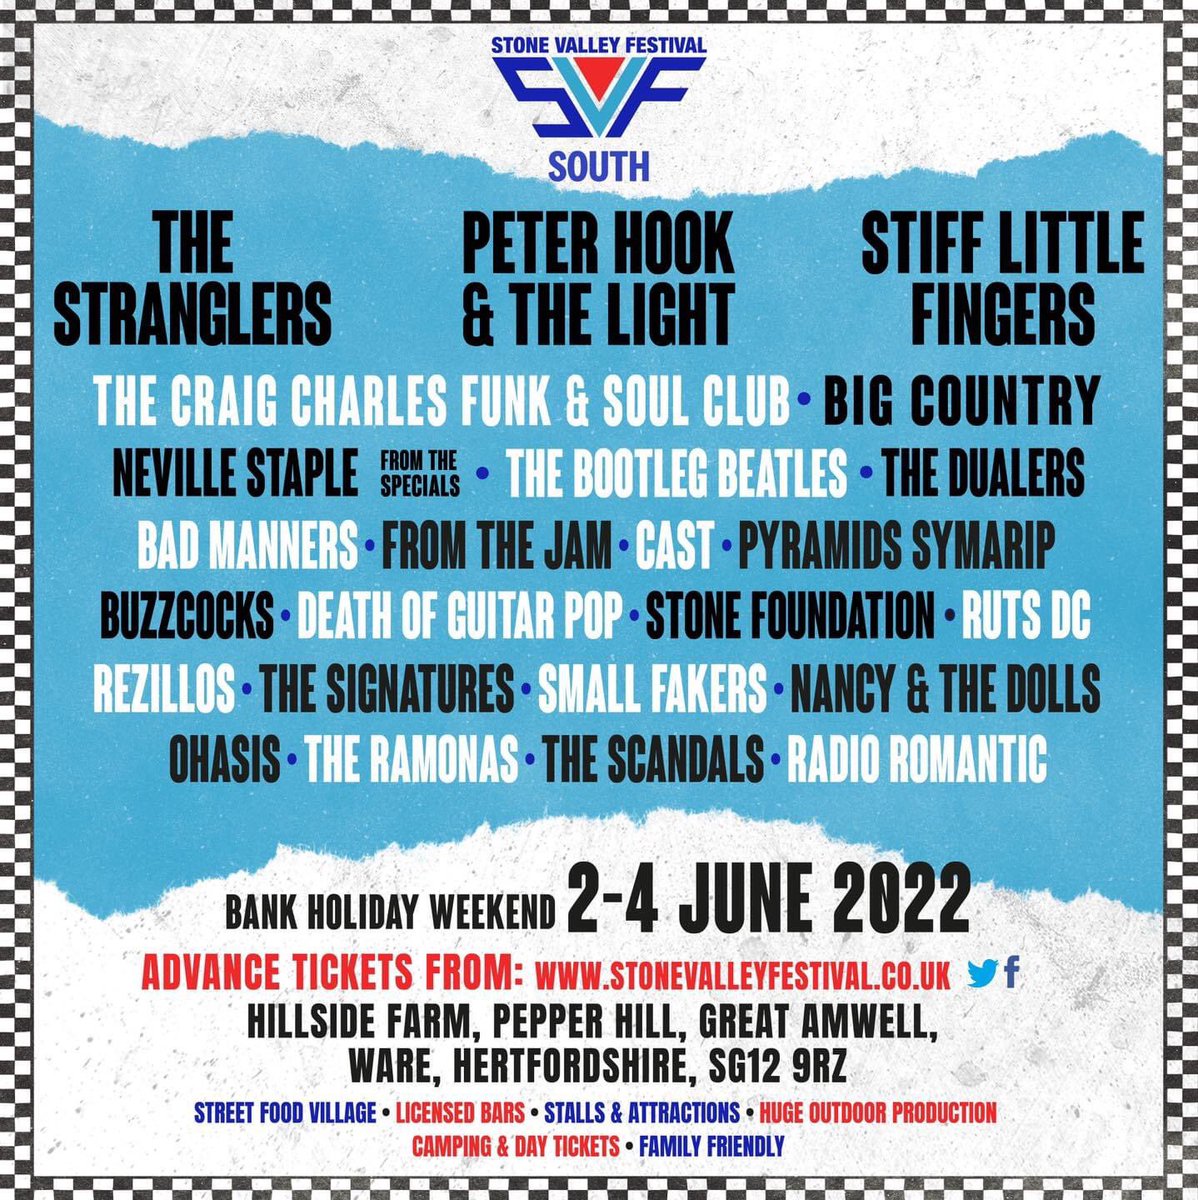 Only 10 weeks till SVF South! Who else is counting down? 🤩 🎟 Tickets: bit.ly/SVFSouth22 #stonevalleyfestival #musicfestival #musicfestival2022 #ska #indie #northernsoul #soulmusic #punk